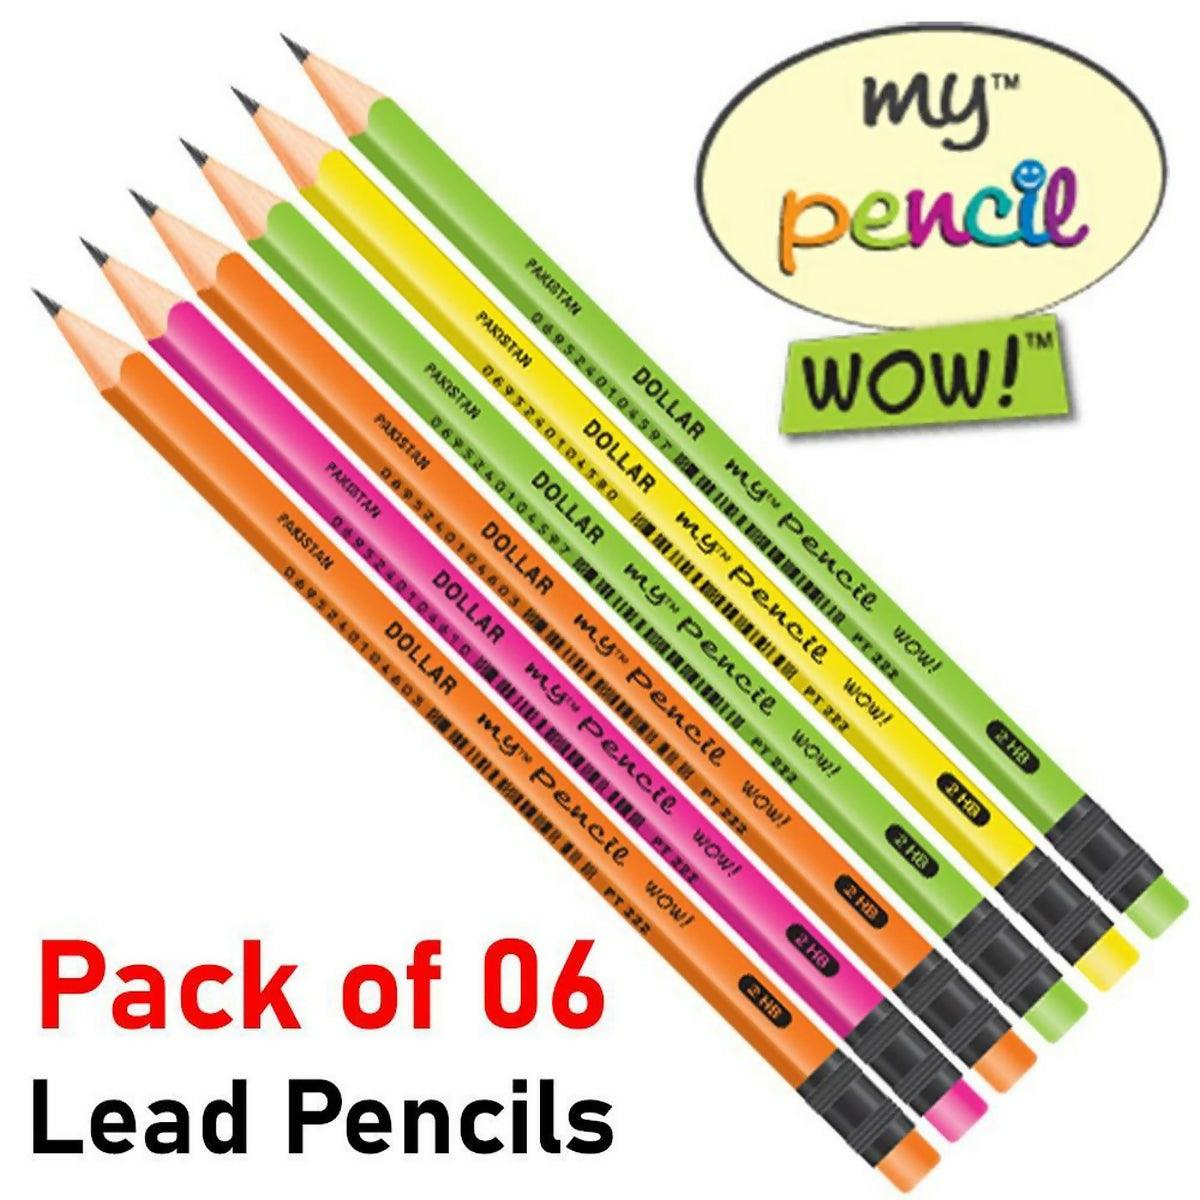 Pack of 6 Lead Pencils - My Pencil WOW with Eraser - 06 Pcs Lead Pencil for writing - ValueBox